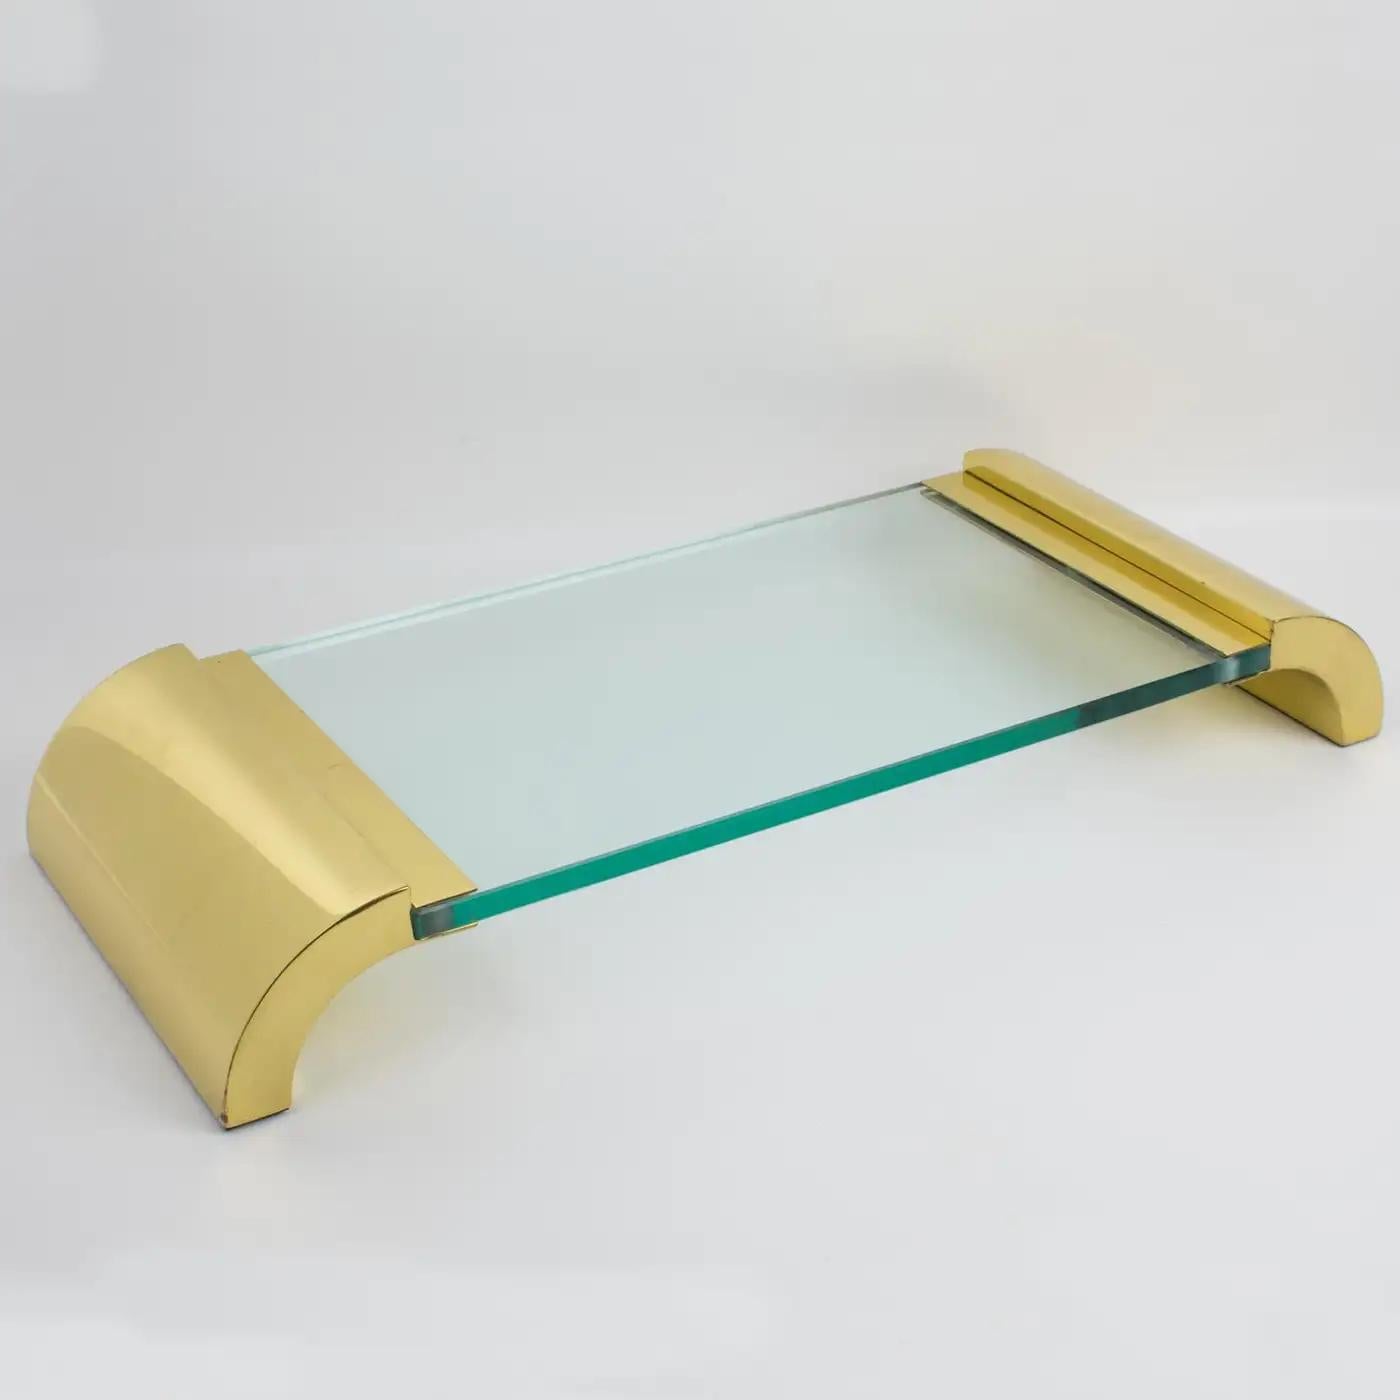 Metal Modernist Brass and Glass Pedestal Centerpiece Display Tray, Italy 1980s For Sale